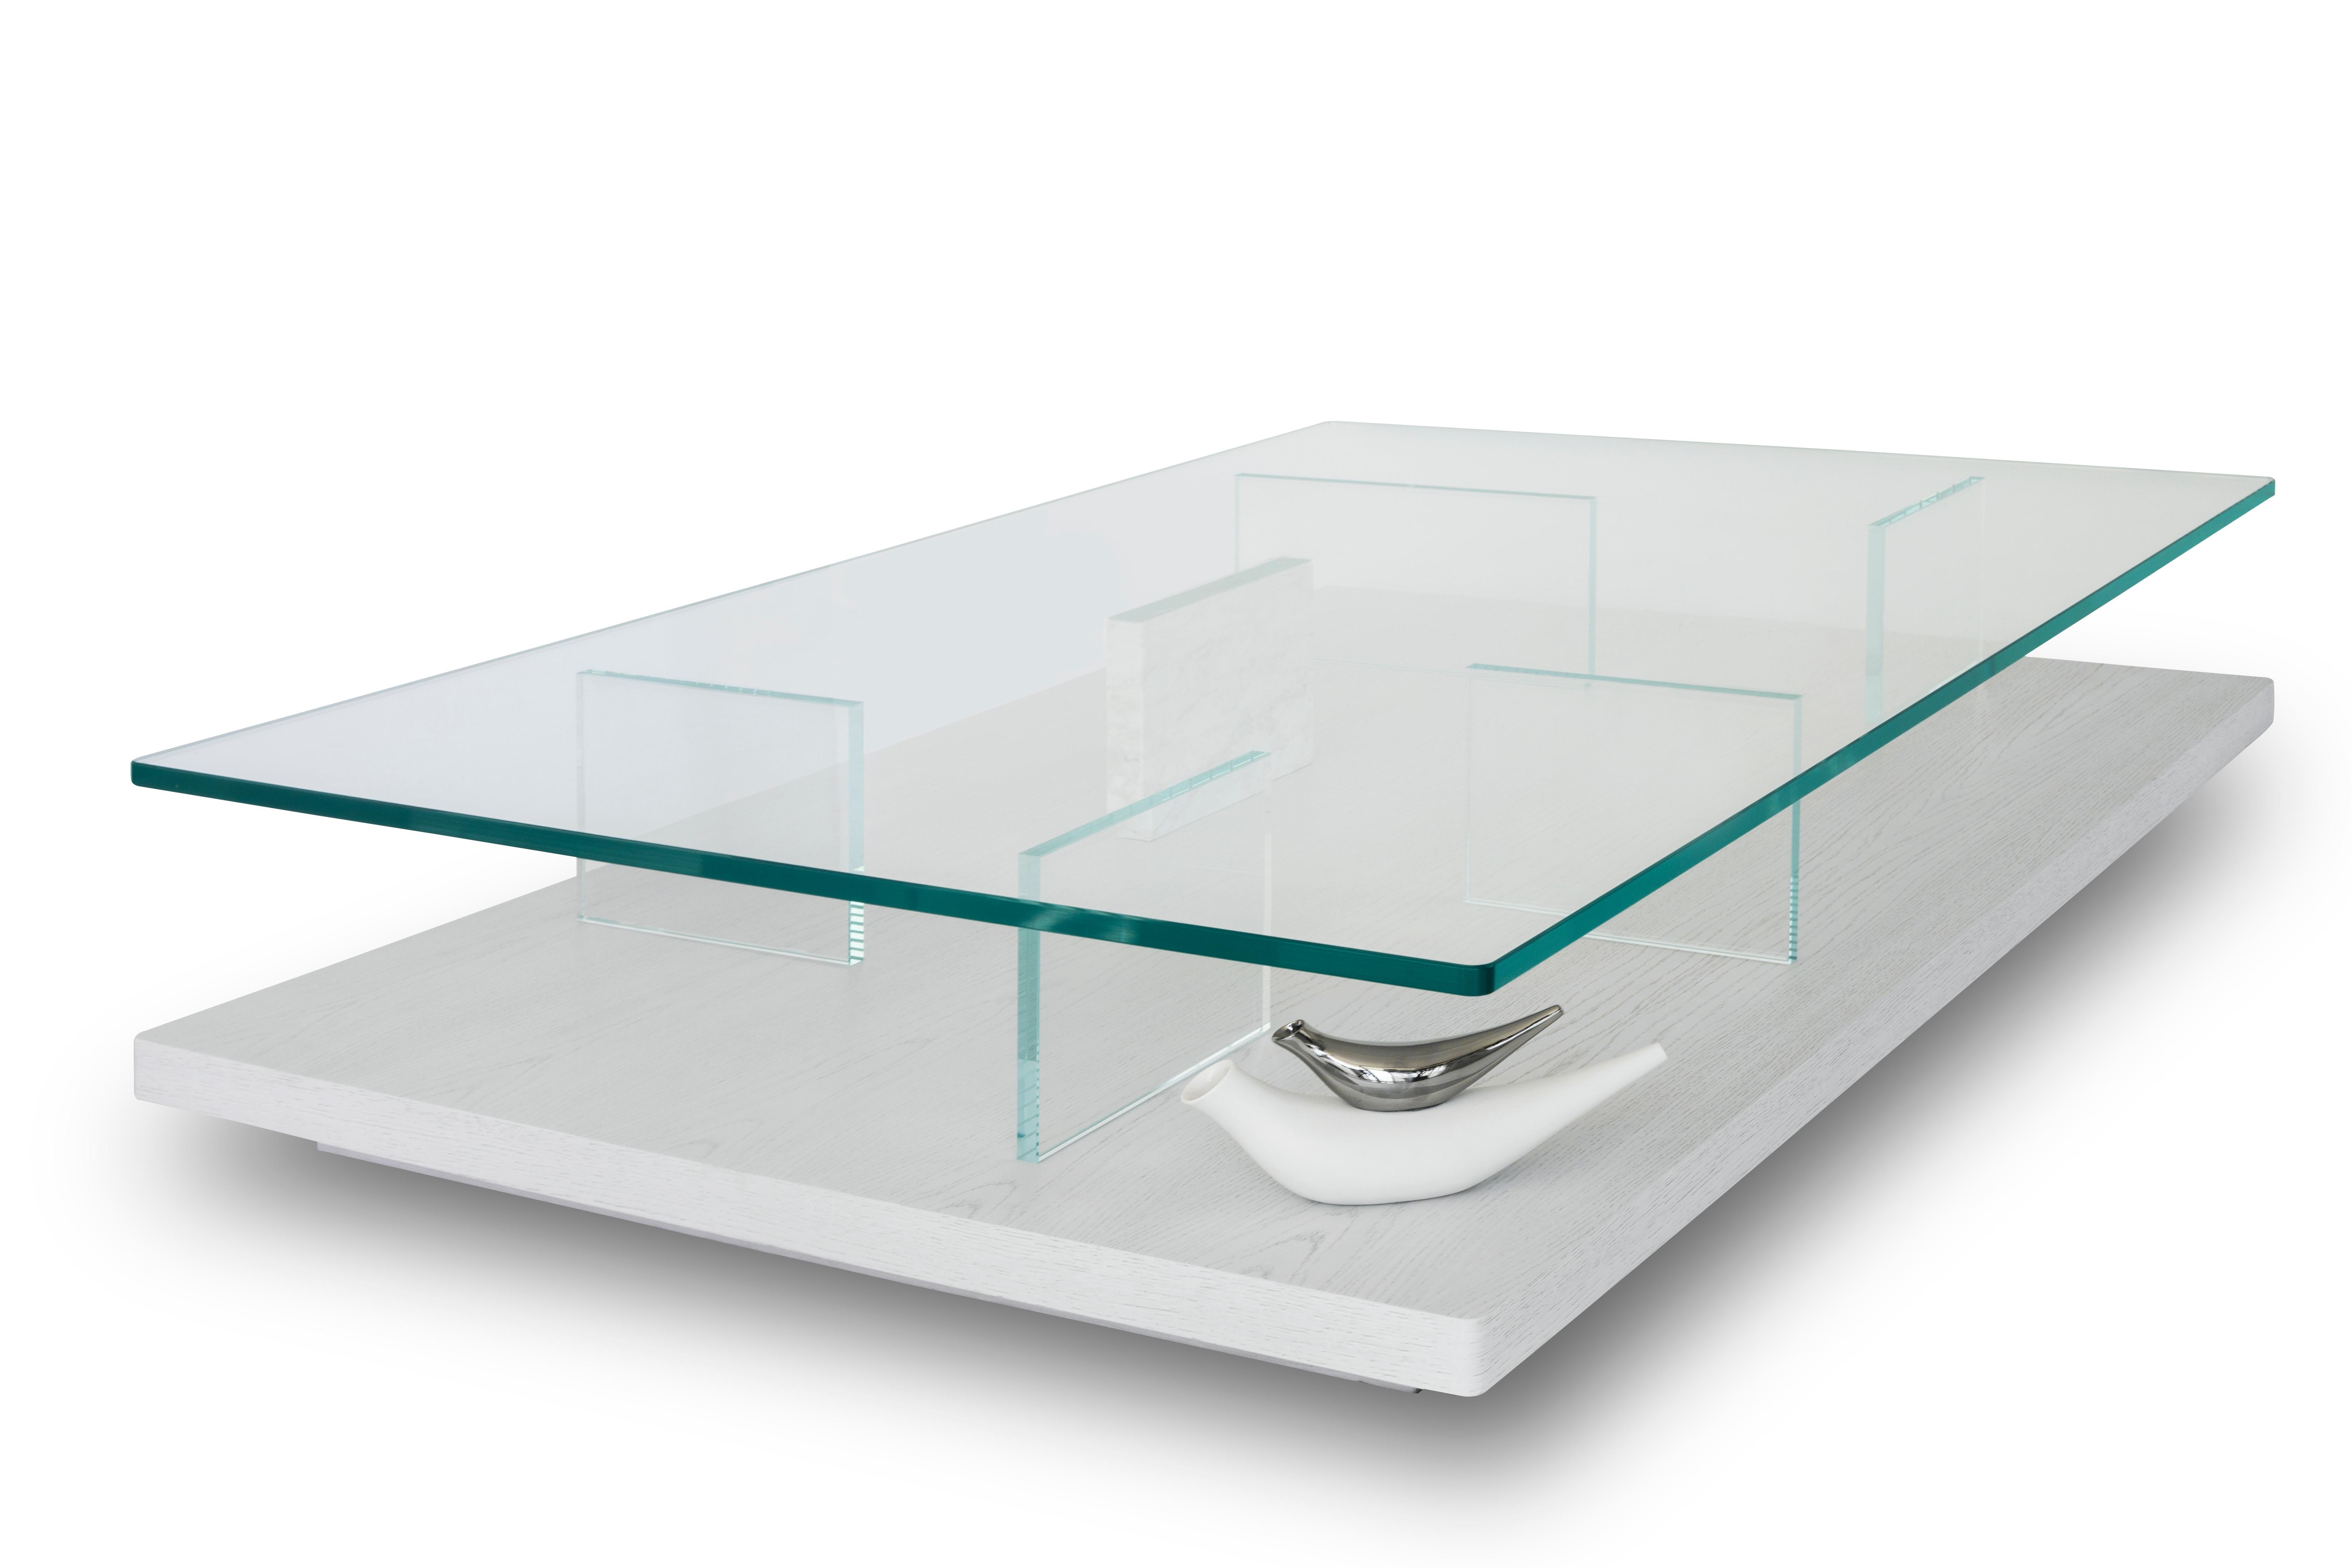 The clear and purist design of the Puro coffee table follows a modern approach that elevates the combination of wood and glass with a protagonist divider of Italian marble.

As shown wood: White milk oak glass: Clear marble: Calacatta